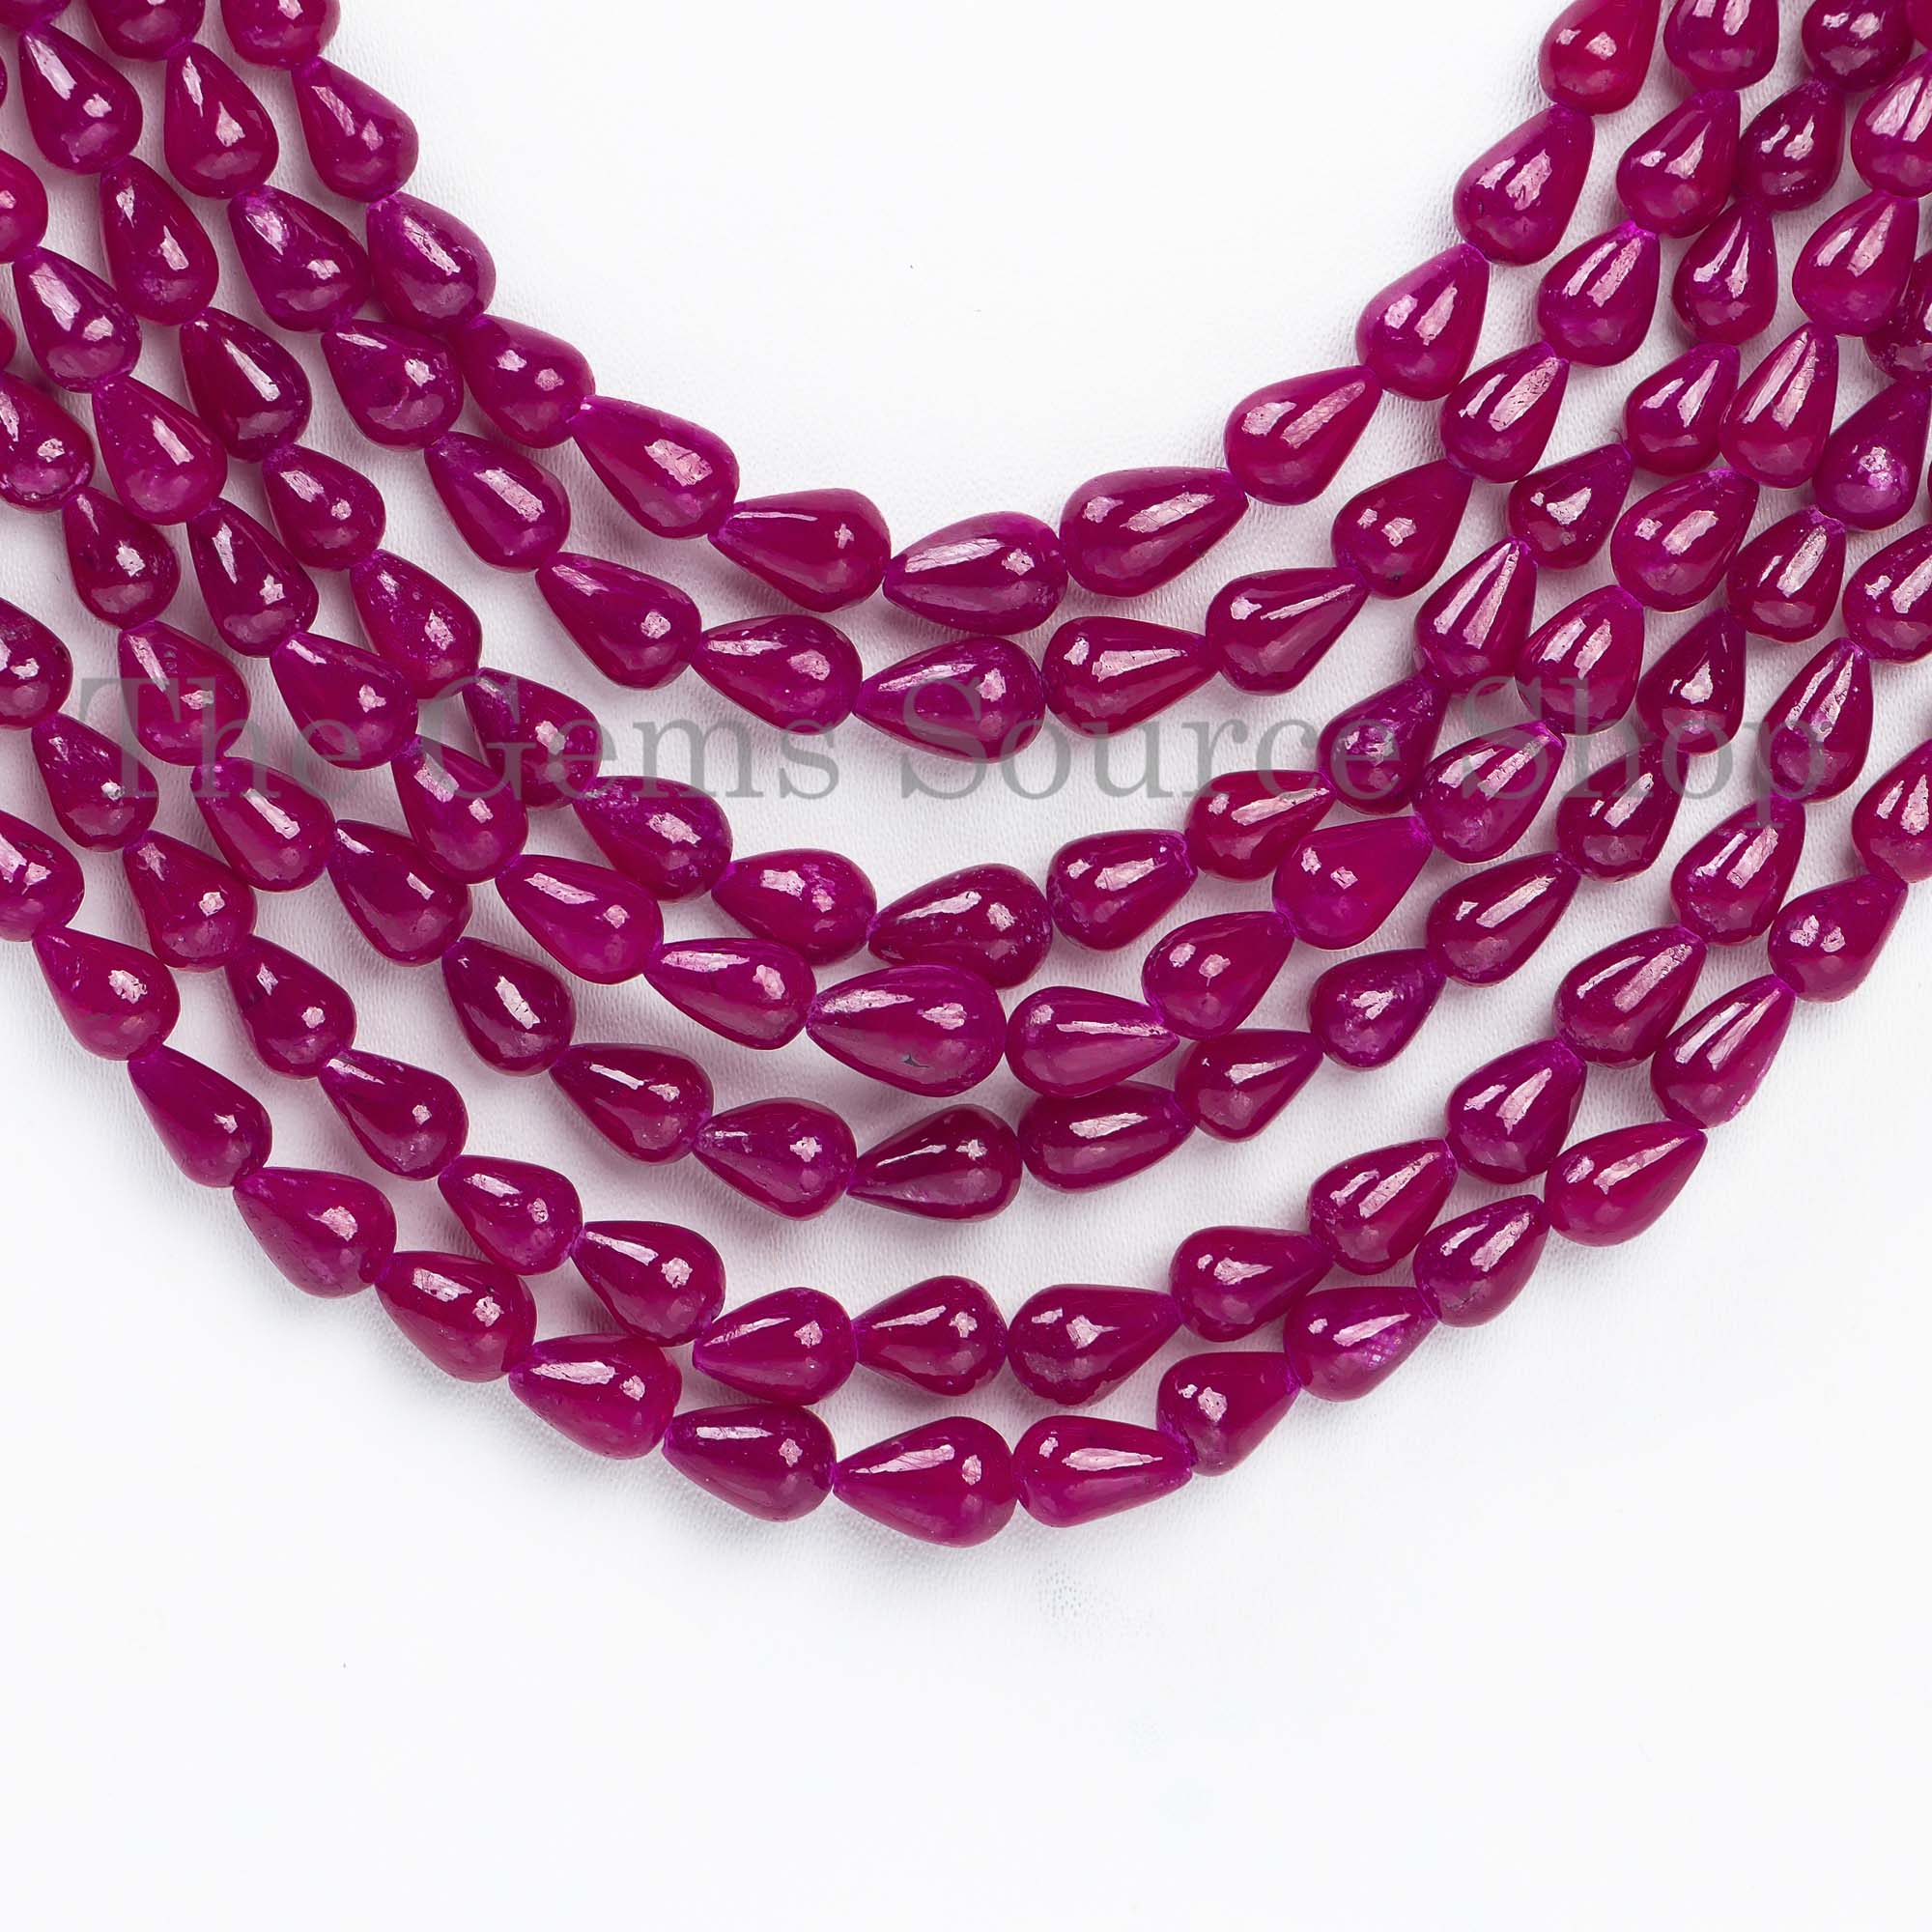 Natural Ruby Smooth Necklace, Gemstone Necklace, 4x5-6.5x9.5mm Tear Drop Beads, Birthstone Necklace, Beaded Necklace